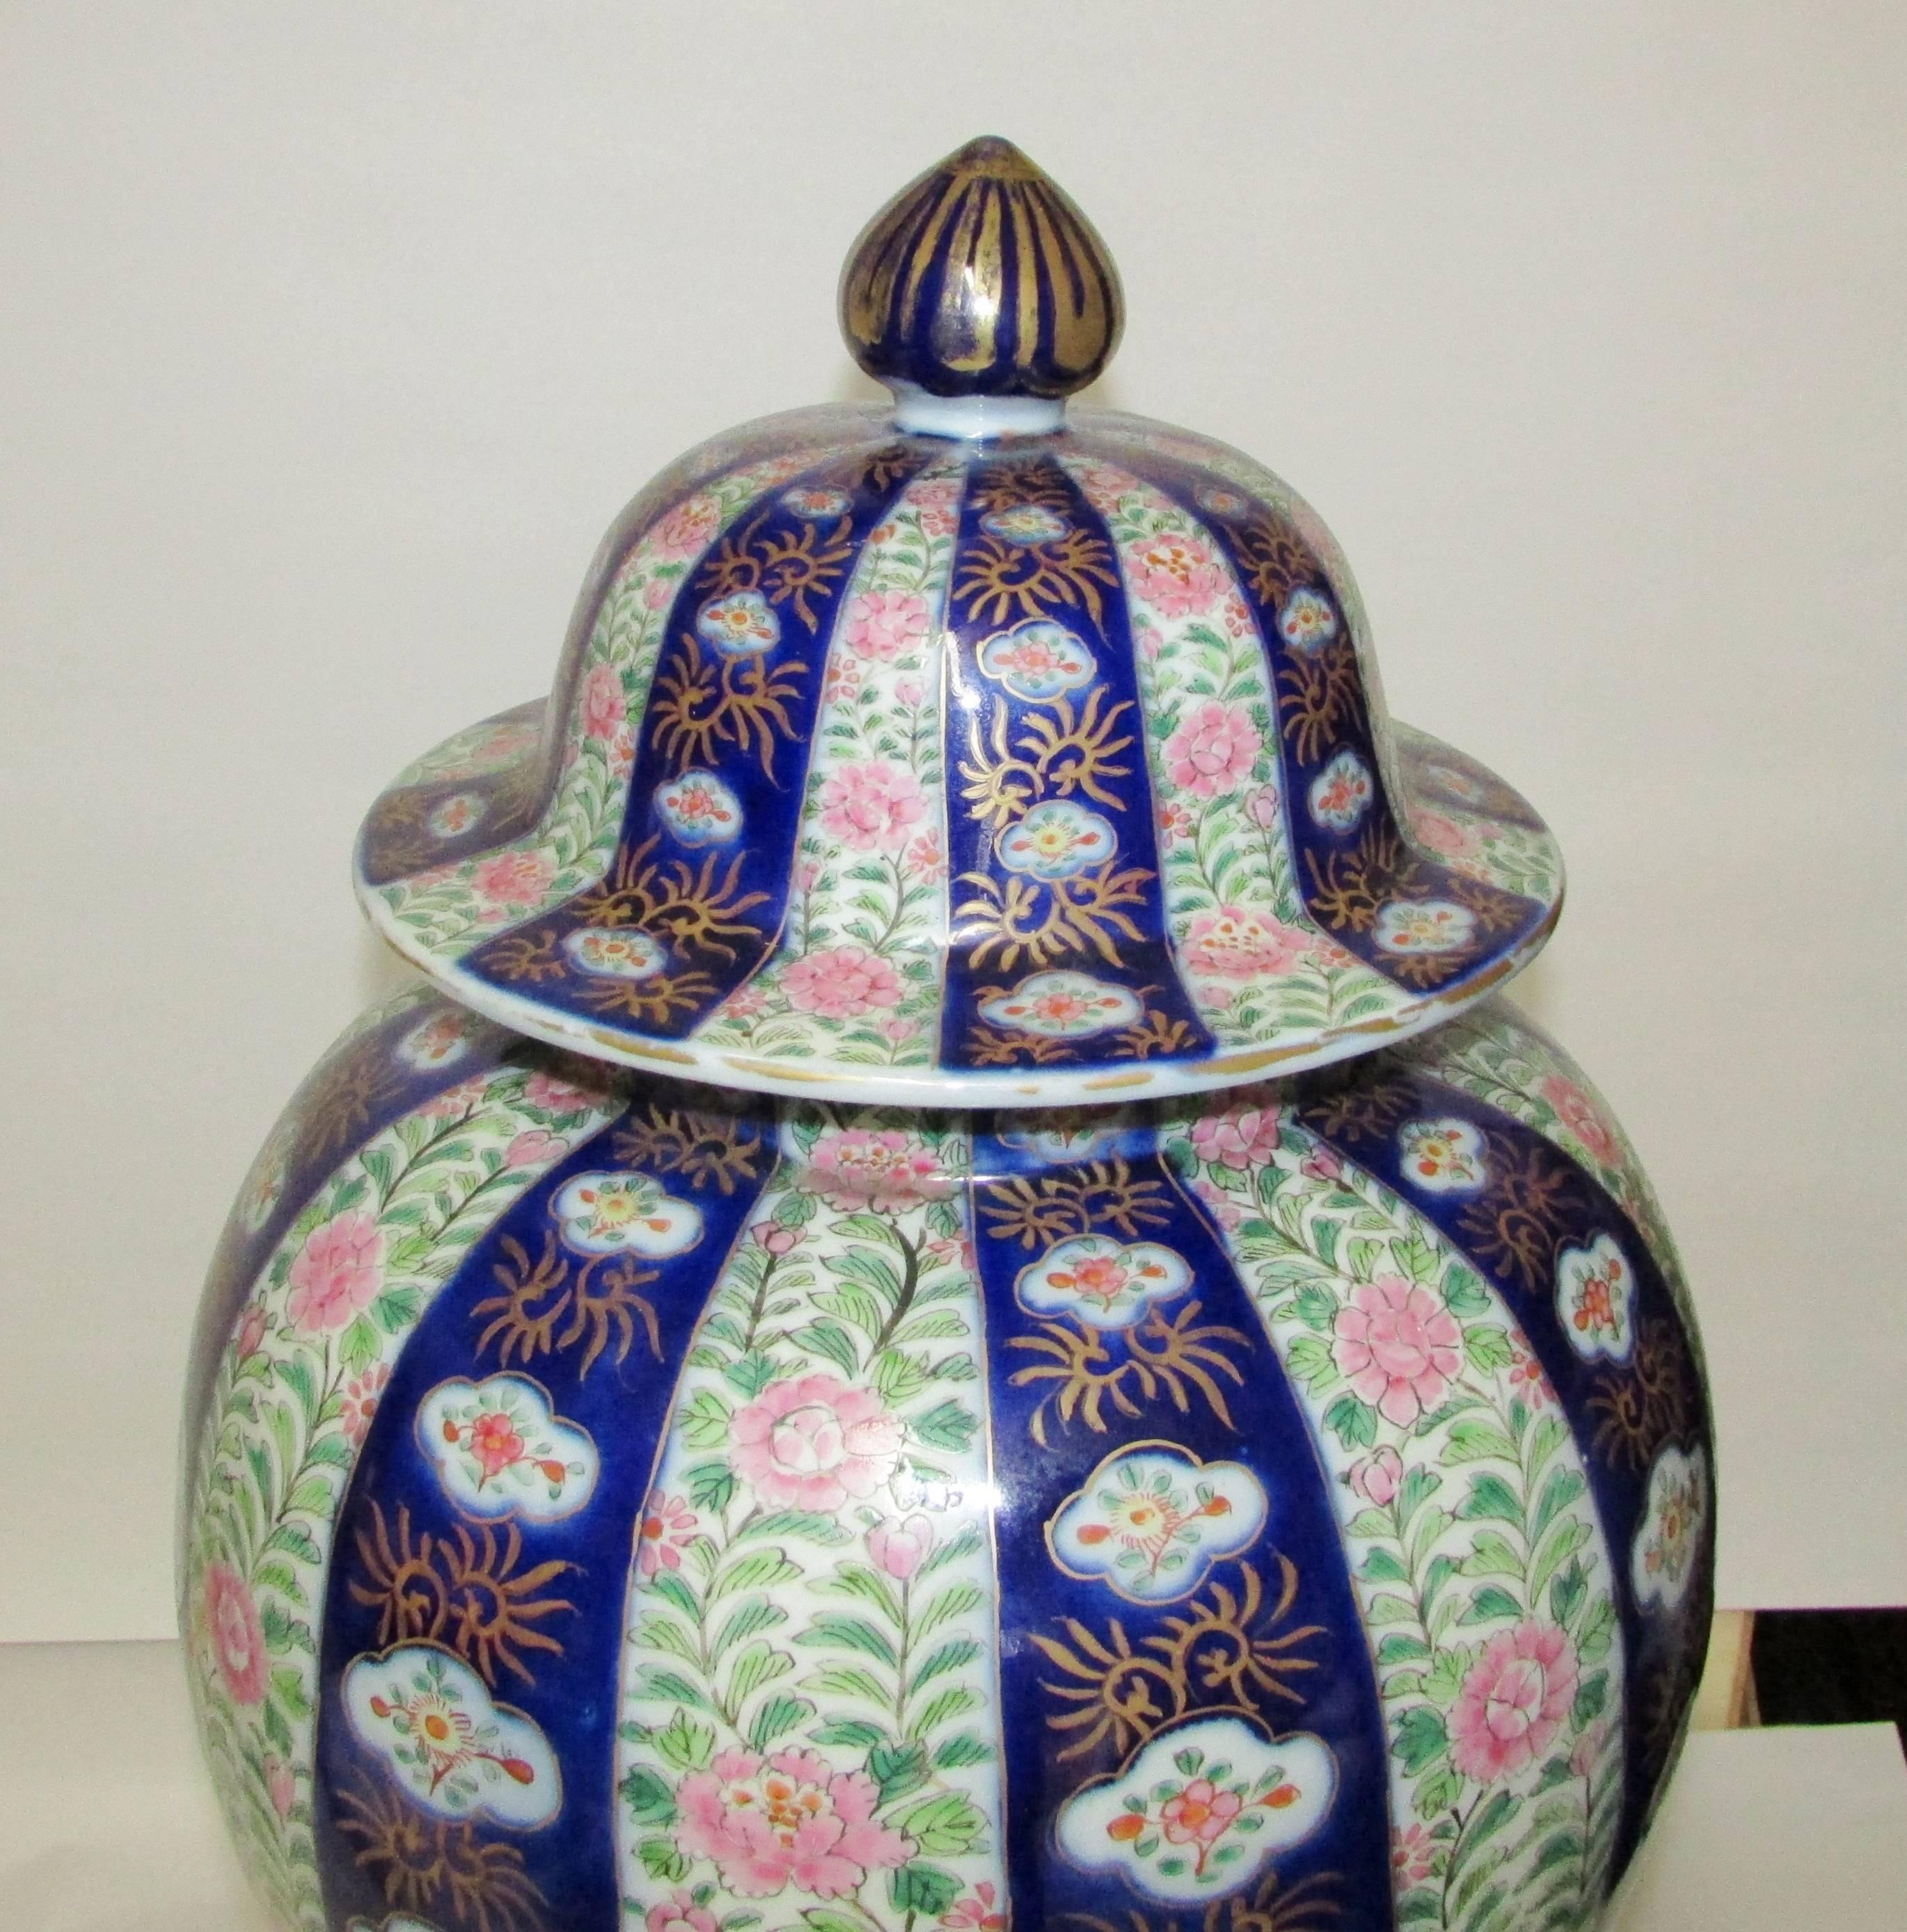 Excellent quality and skilfully painted Imari temple jar. The hand-painted decoration is a rare pattern and the quality of Fukagawa. A large size of 24 inches tall.